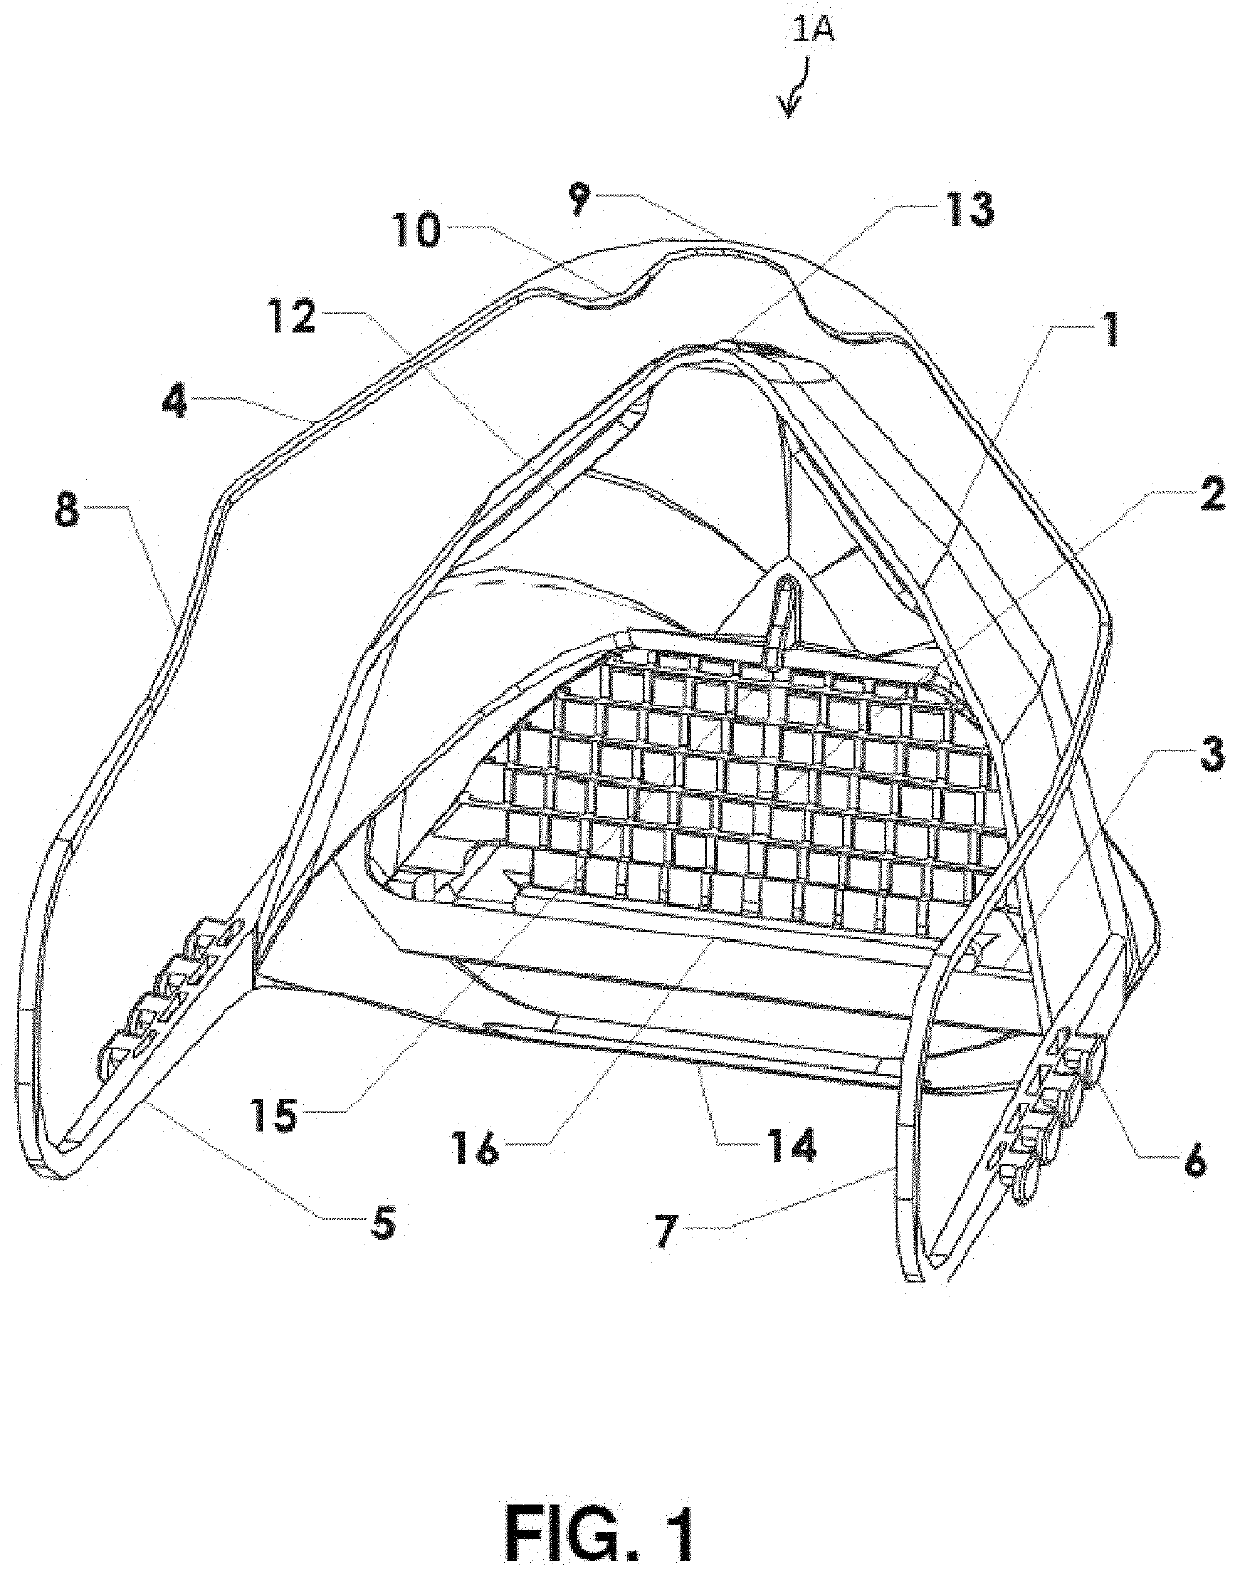 Facemask with filter insert for protection against airborne pathogens